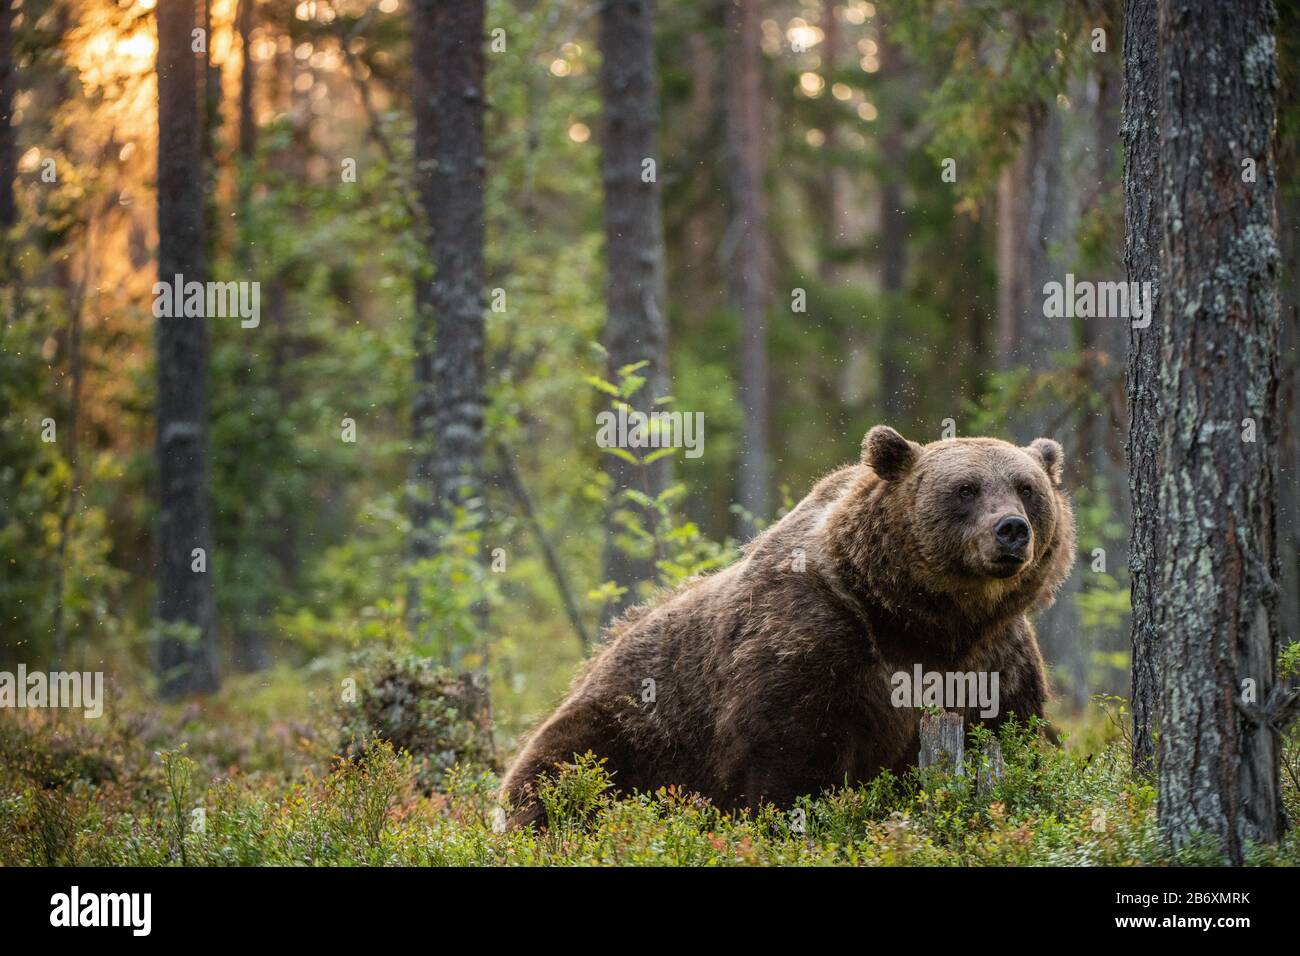 Big brown bear with backlit. Sunset forest in background. Adult Male of Brown bear in the summer forest. Scientific name: Ursus arctos. Natural habita Stock Photo